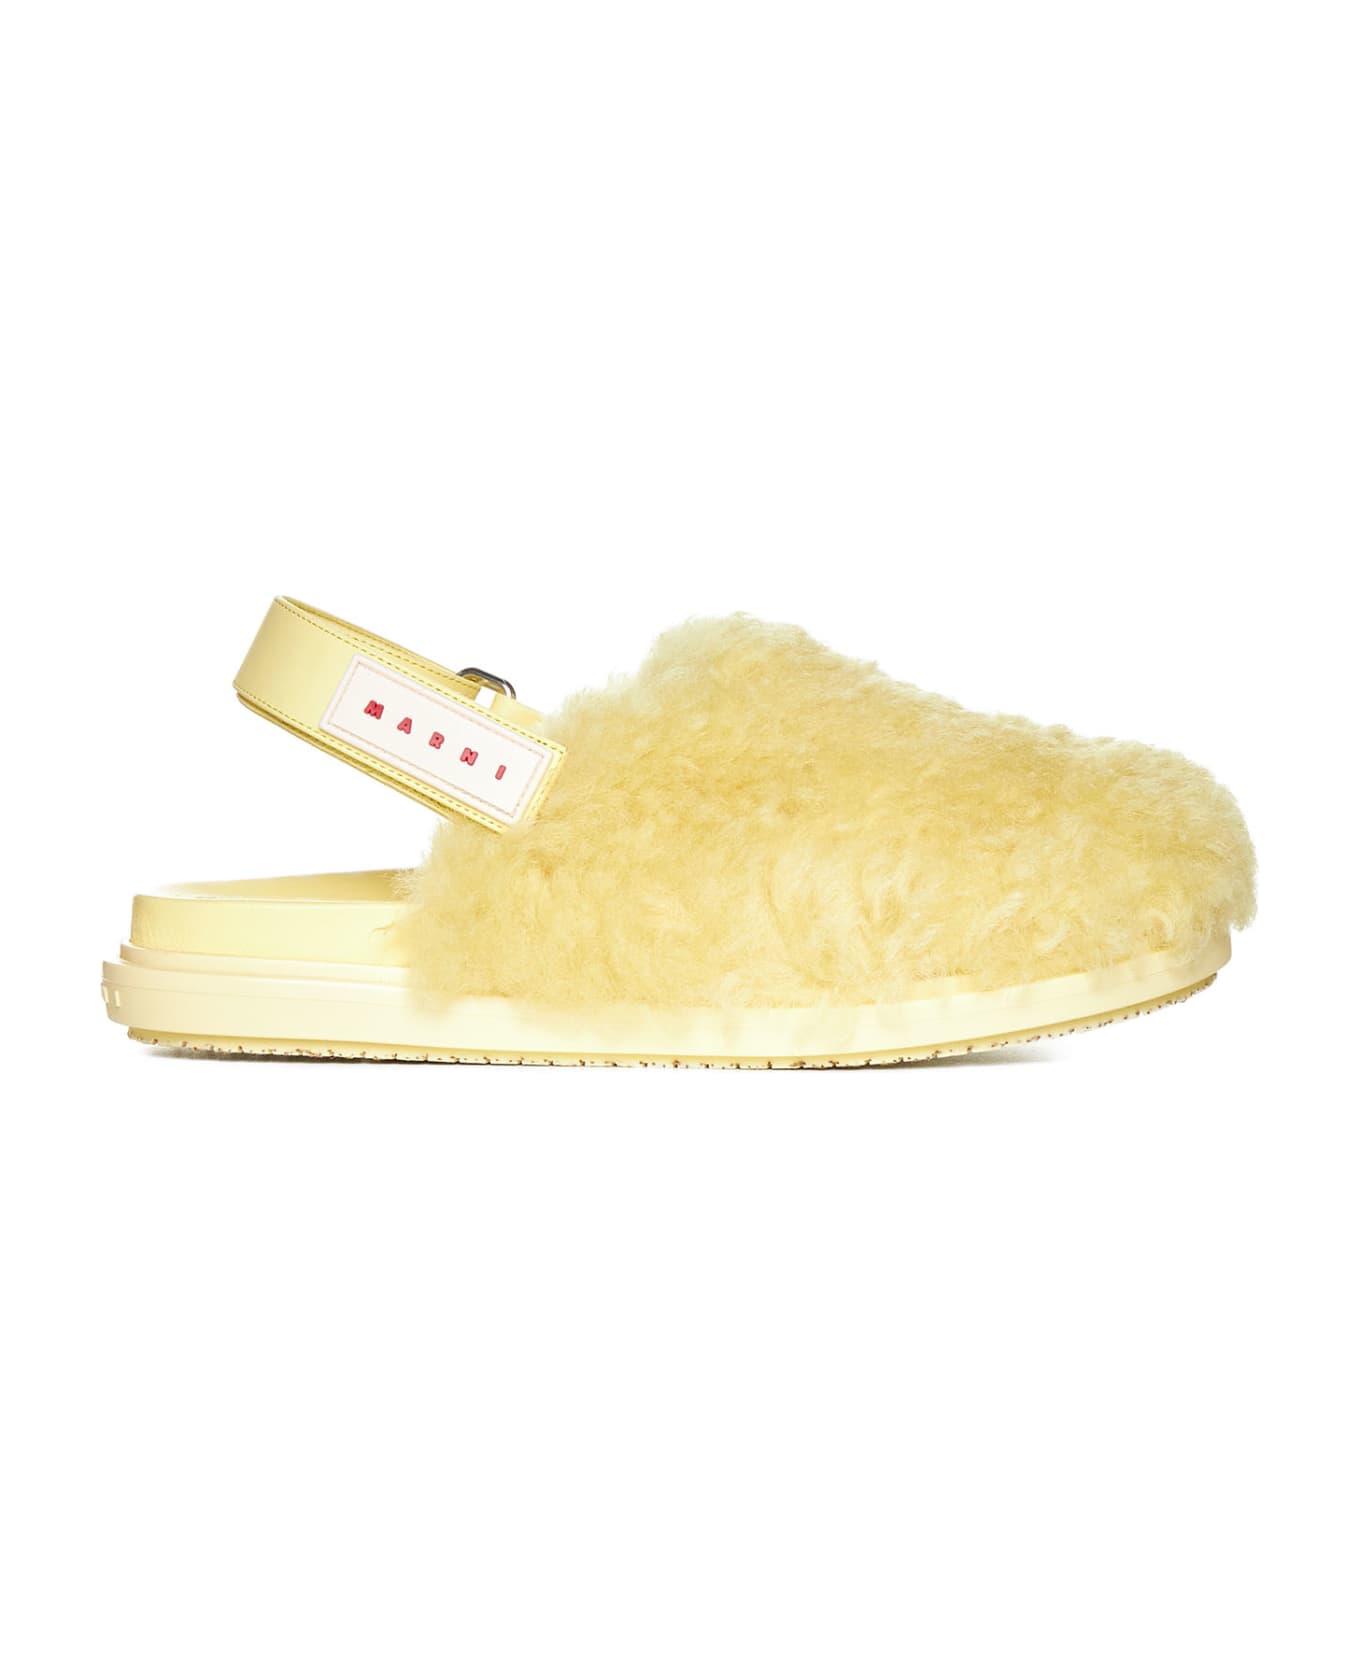 Marni Slipper With Fur And Adjustable Strap - Pineapple